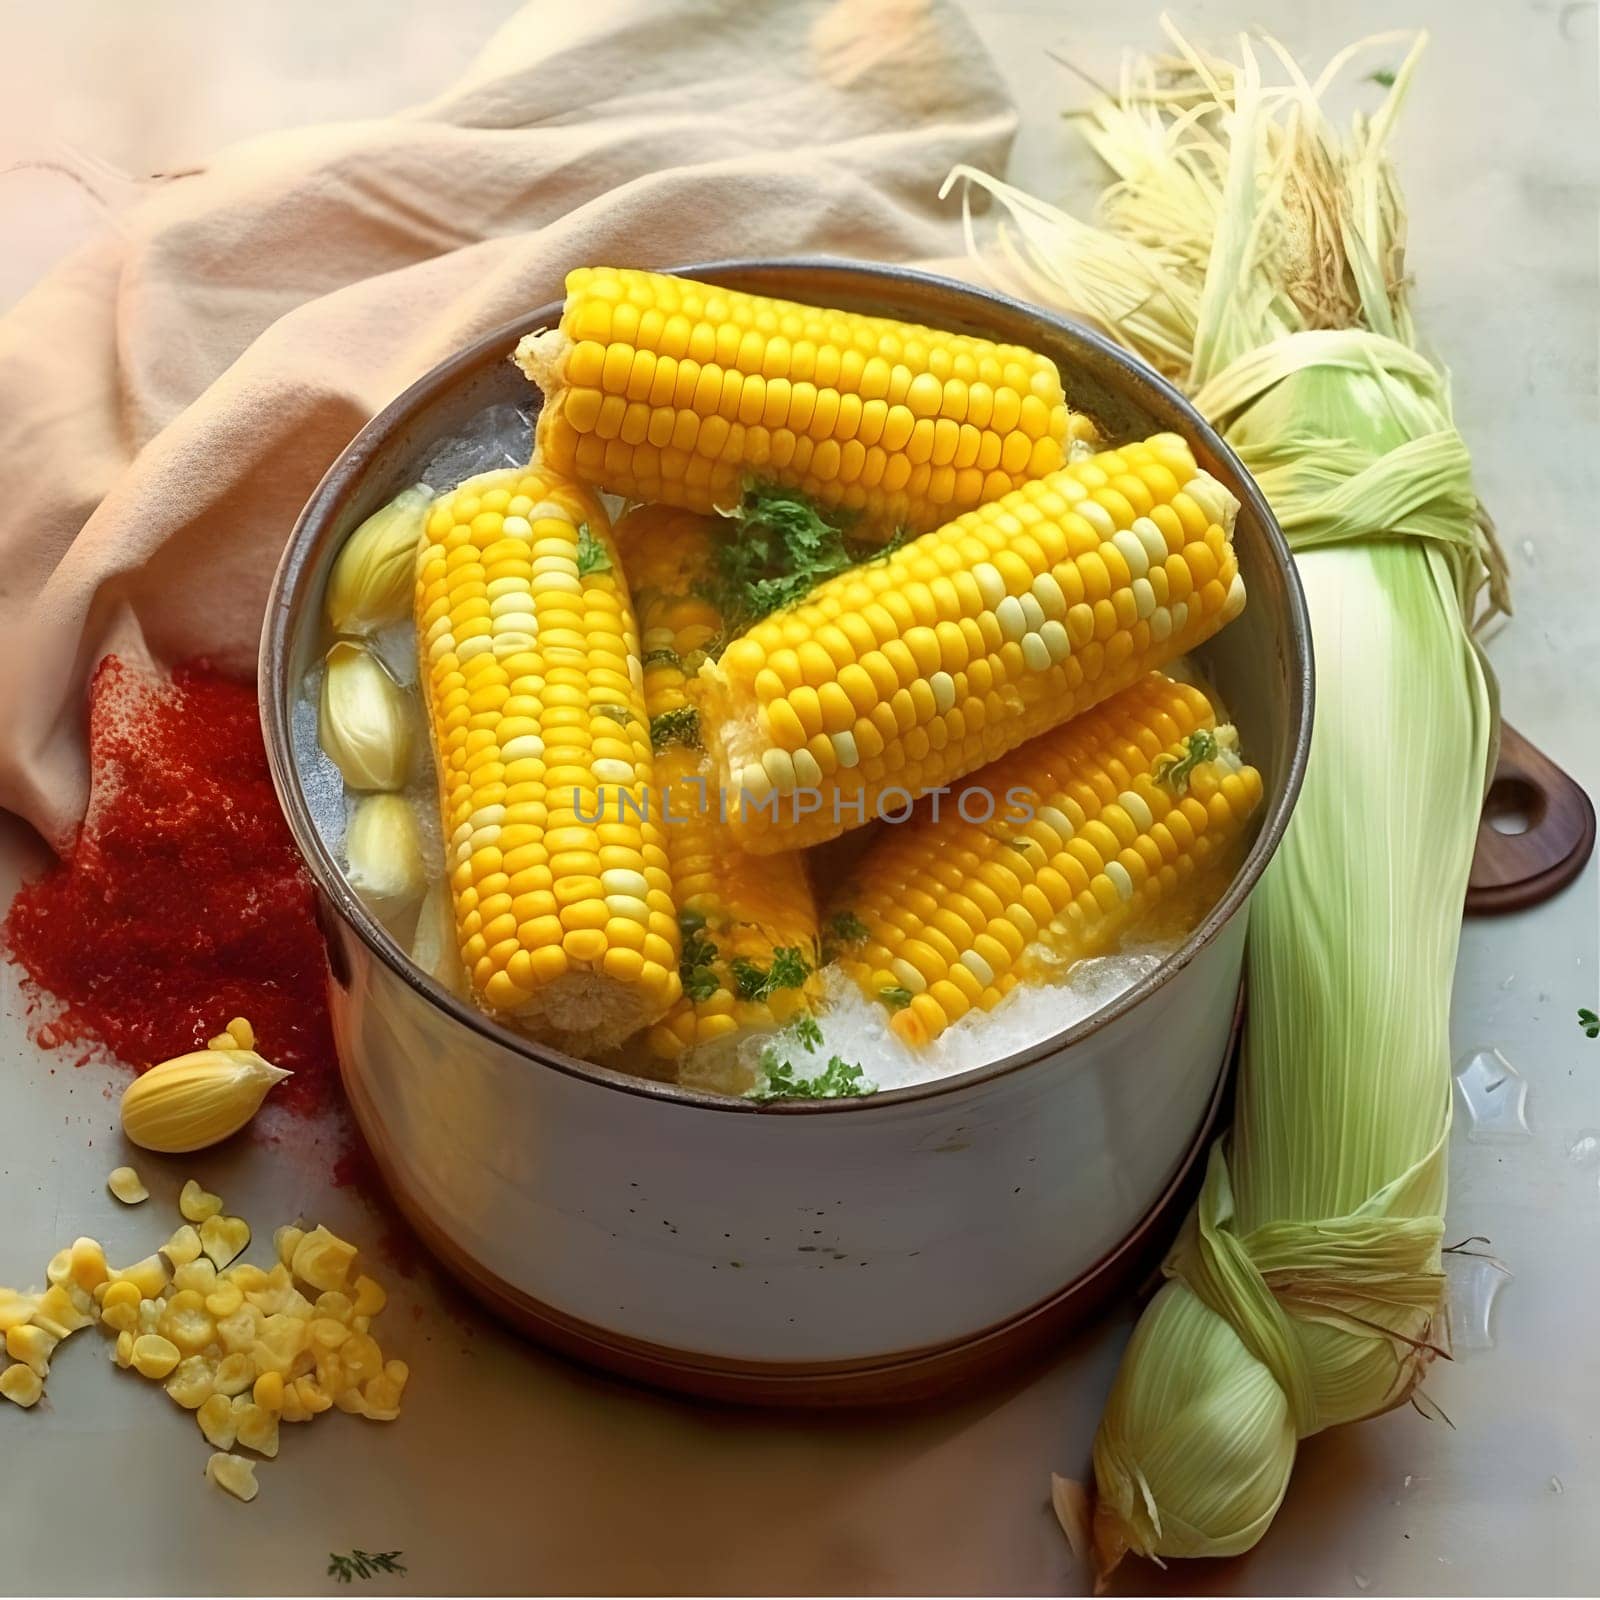 Yellow corn cobs on a wooden bucket. Corn as a dish of thanksgiving for the harvest. by ThemesS